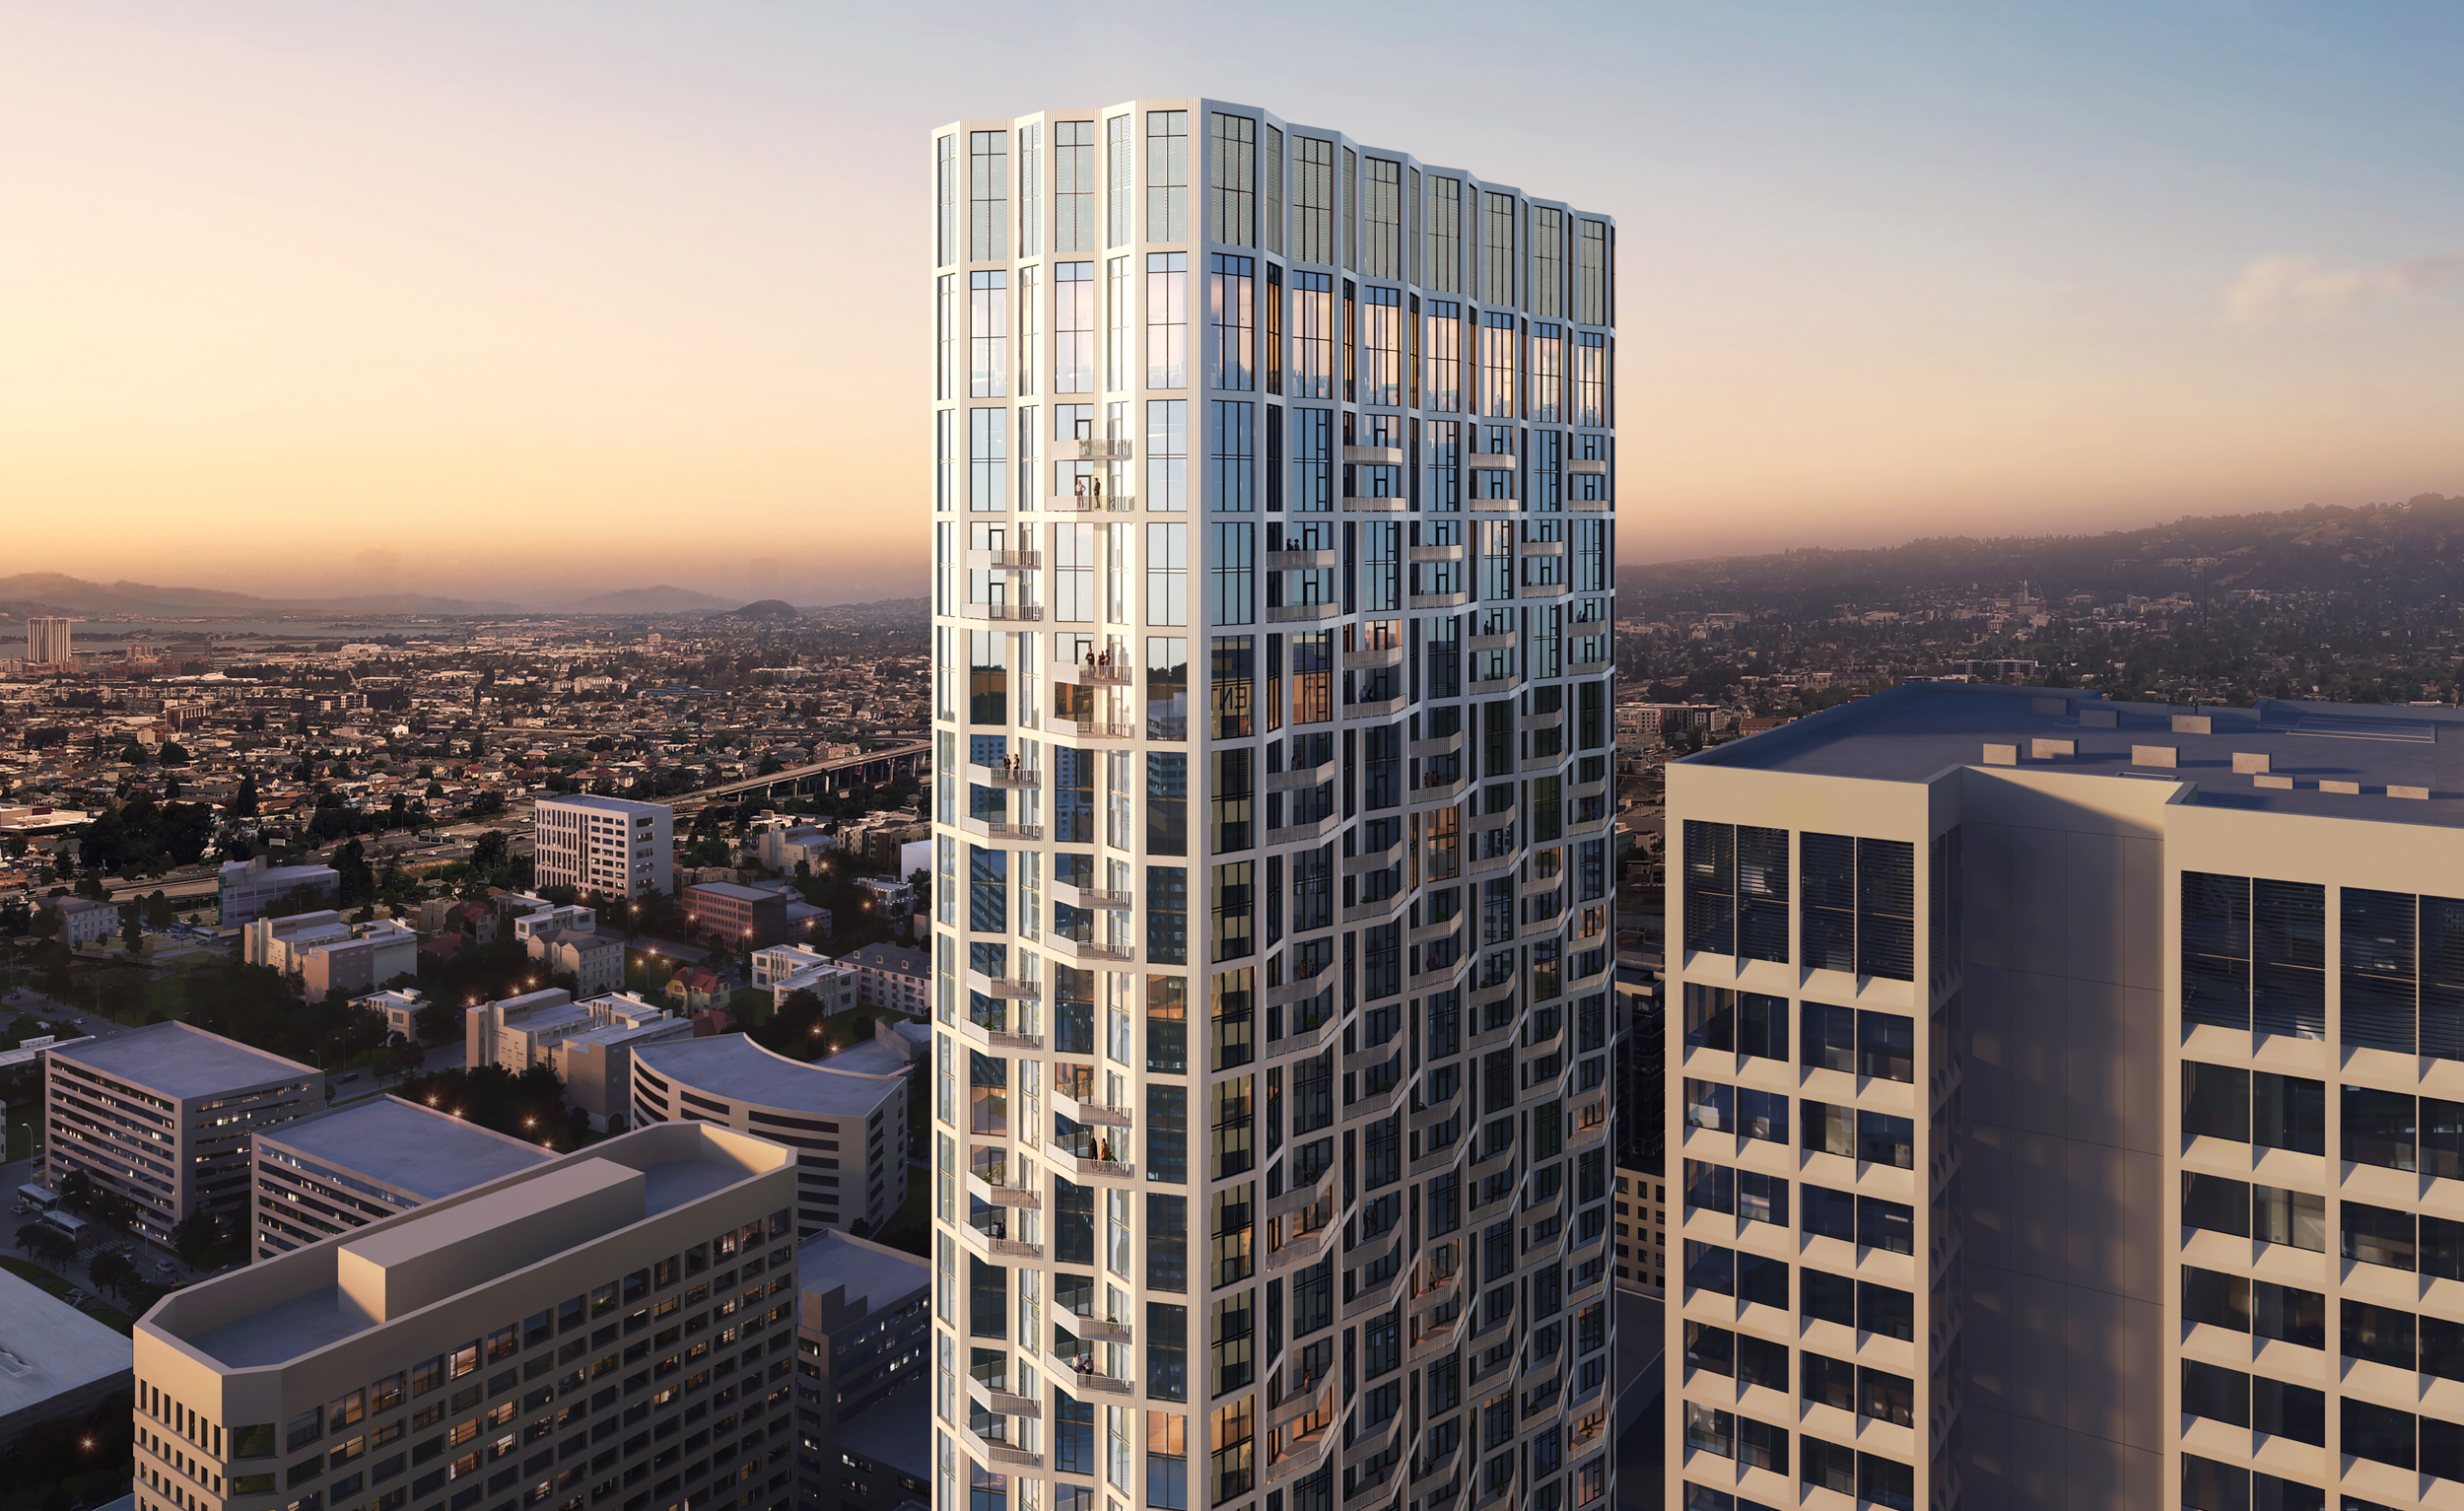 Town Tower at 323 22nd Street updated crown design, rendering by Solomon Cordwell Buenz